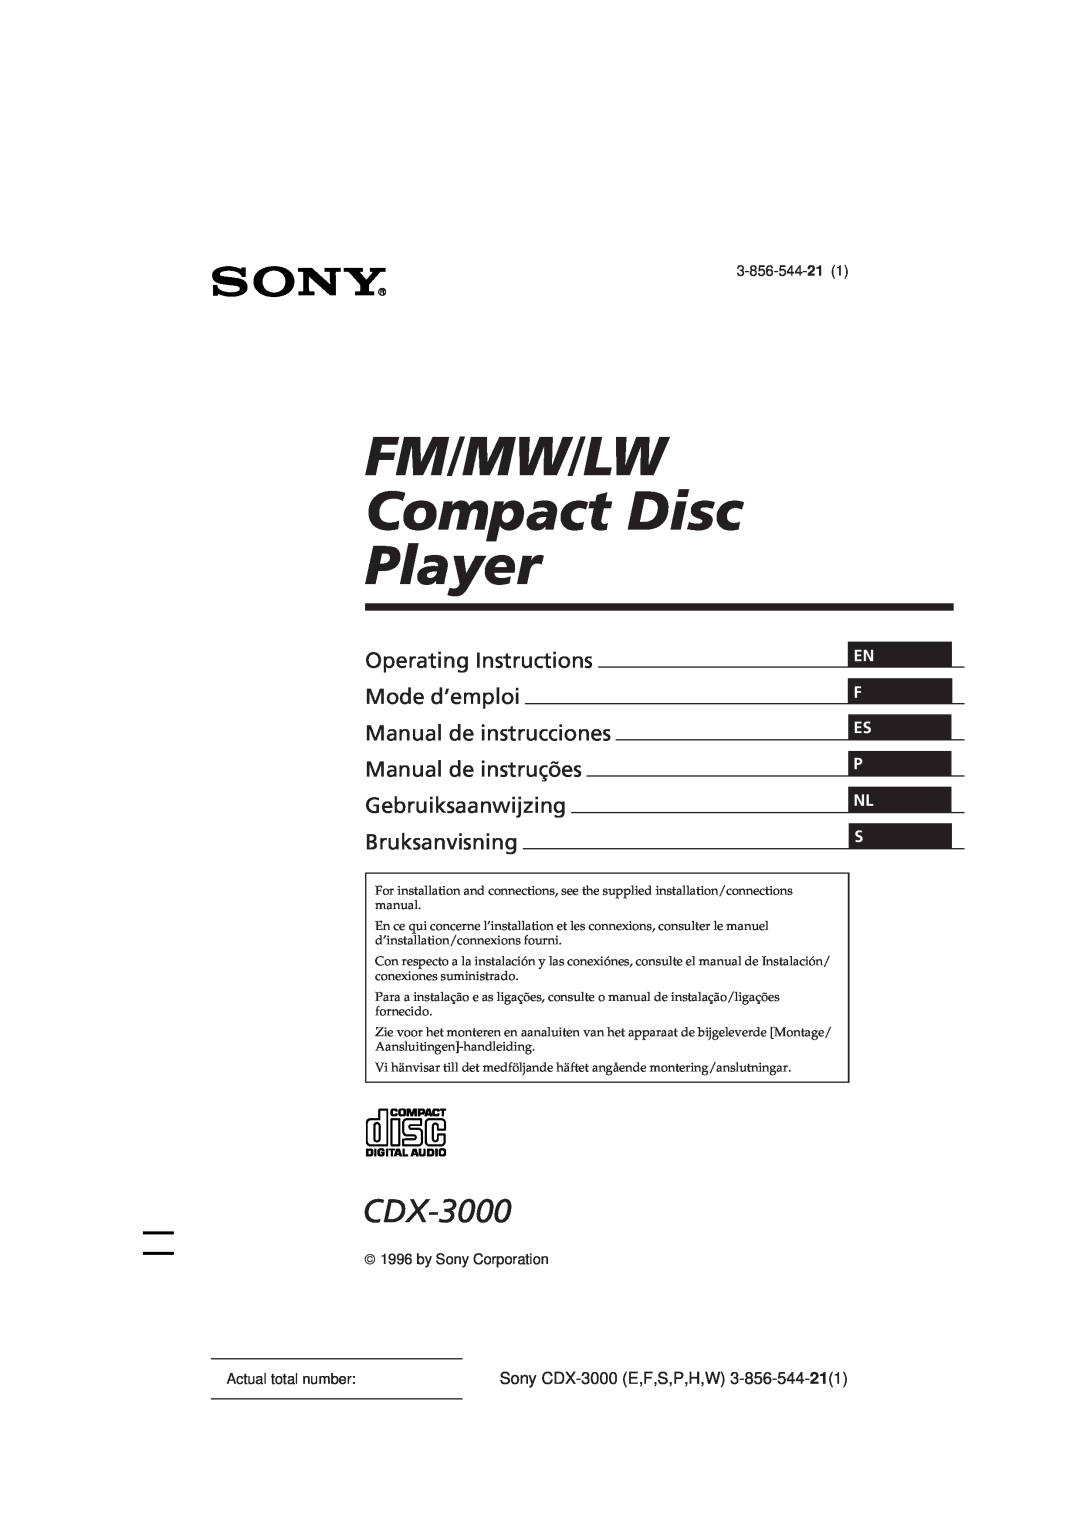 Sony manual En F Es P Nl S, 3-856-544-21, by Sony Corporation, Actual total number, Sony CDX-3000E,F,S,P,H,W 